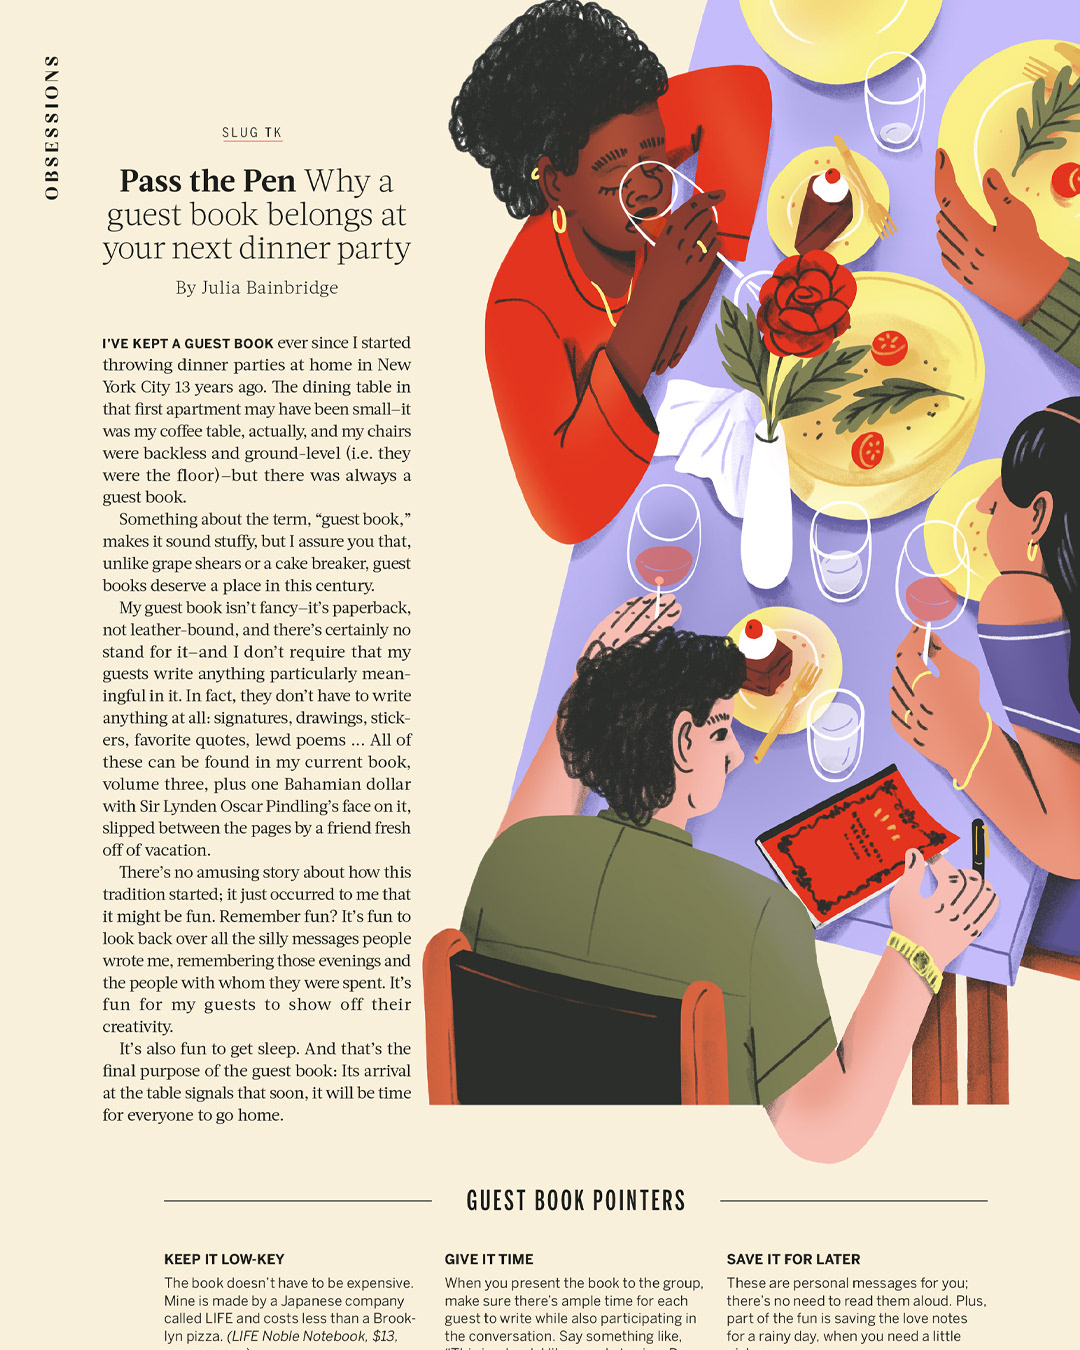 Dinner Table Editorial Illustration Food & Wine Food And Wine food&wine ILLUSTRATION  Magazine illustration party